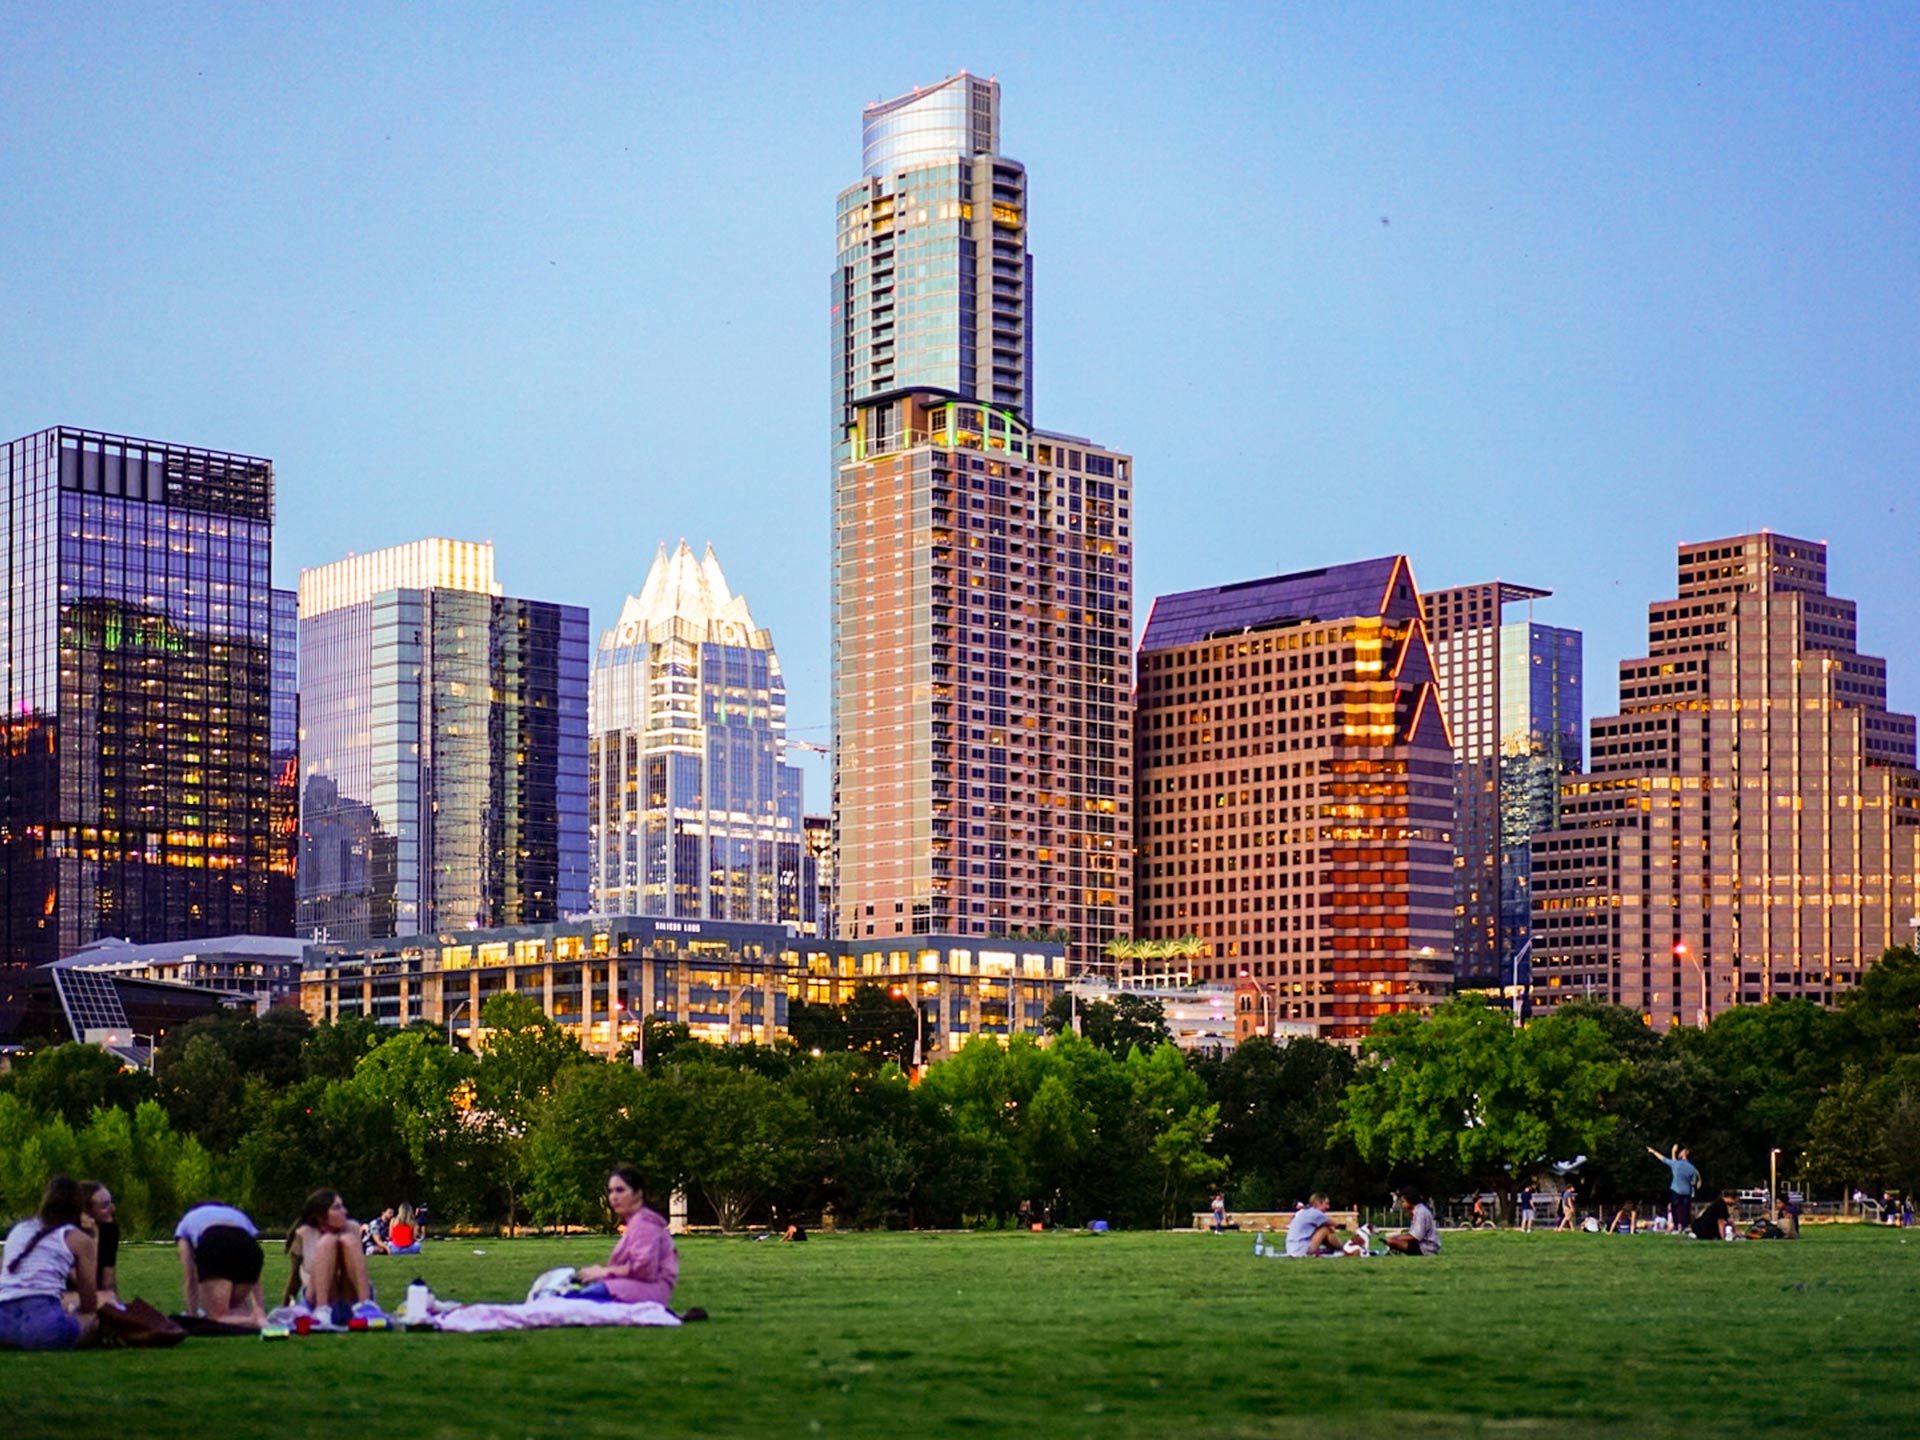 From Nightlife to Nature Excursions: 15 Best Things to Do in Austin